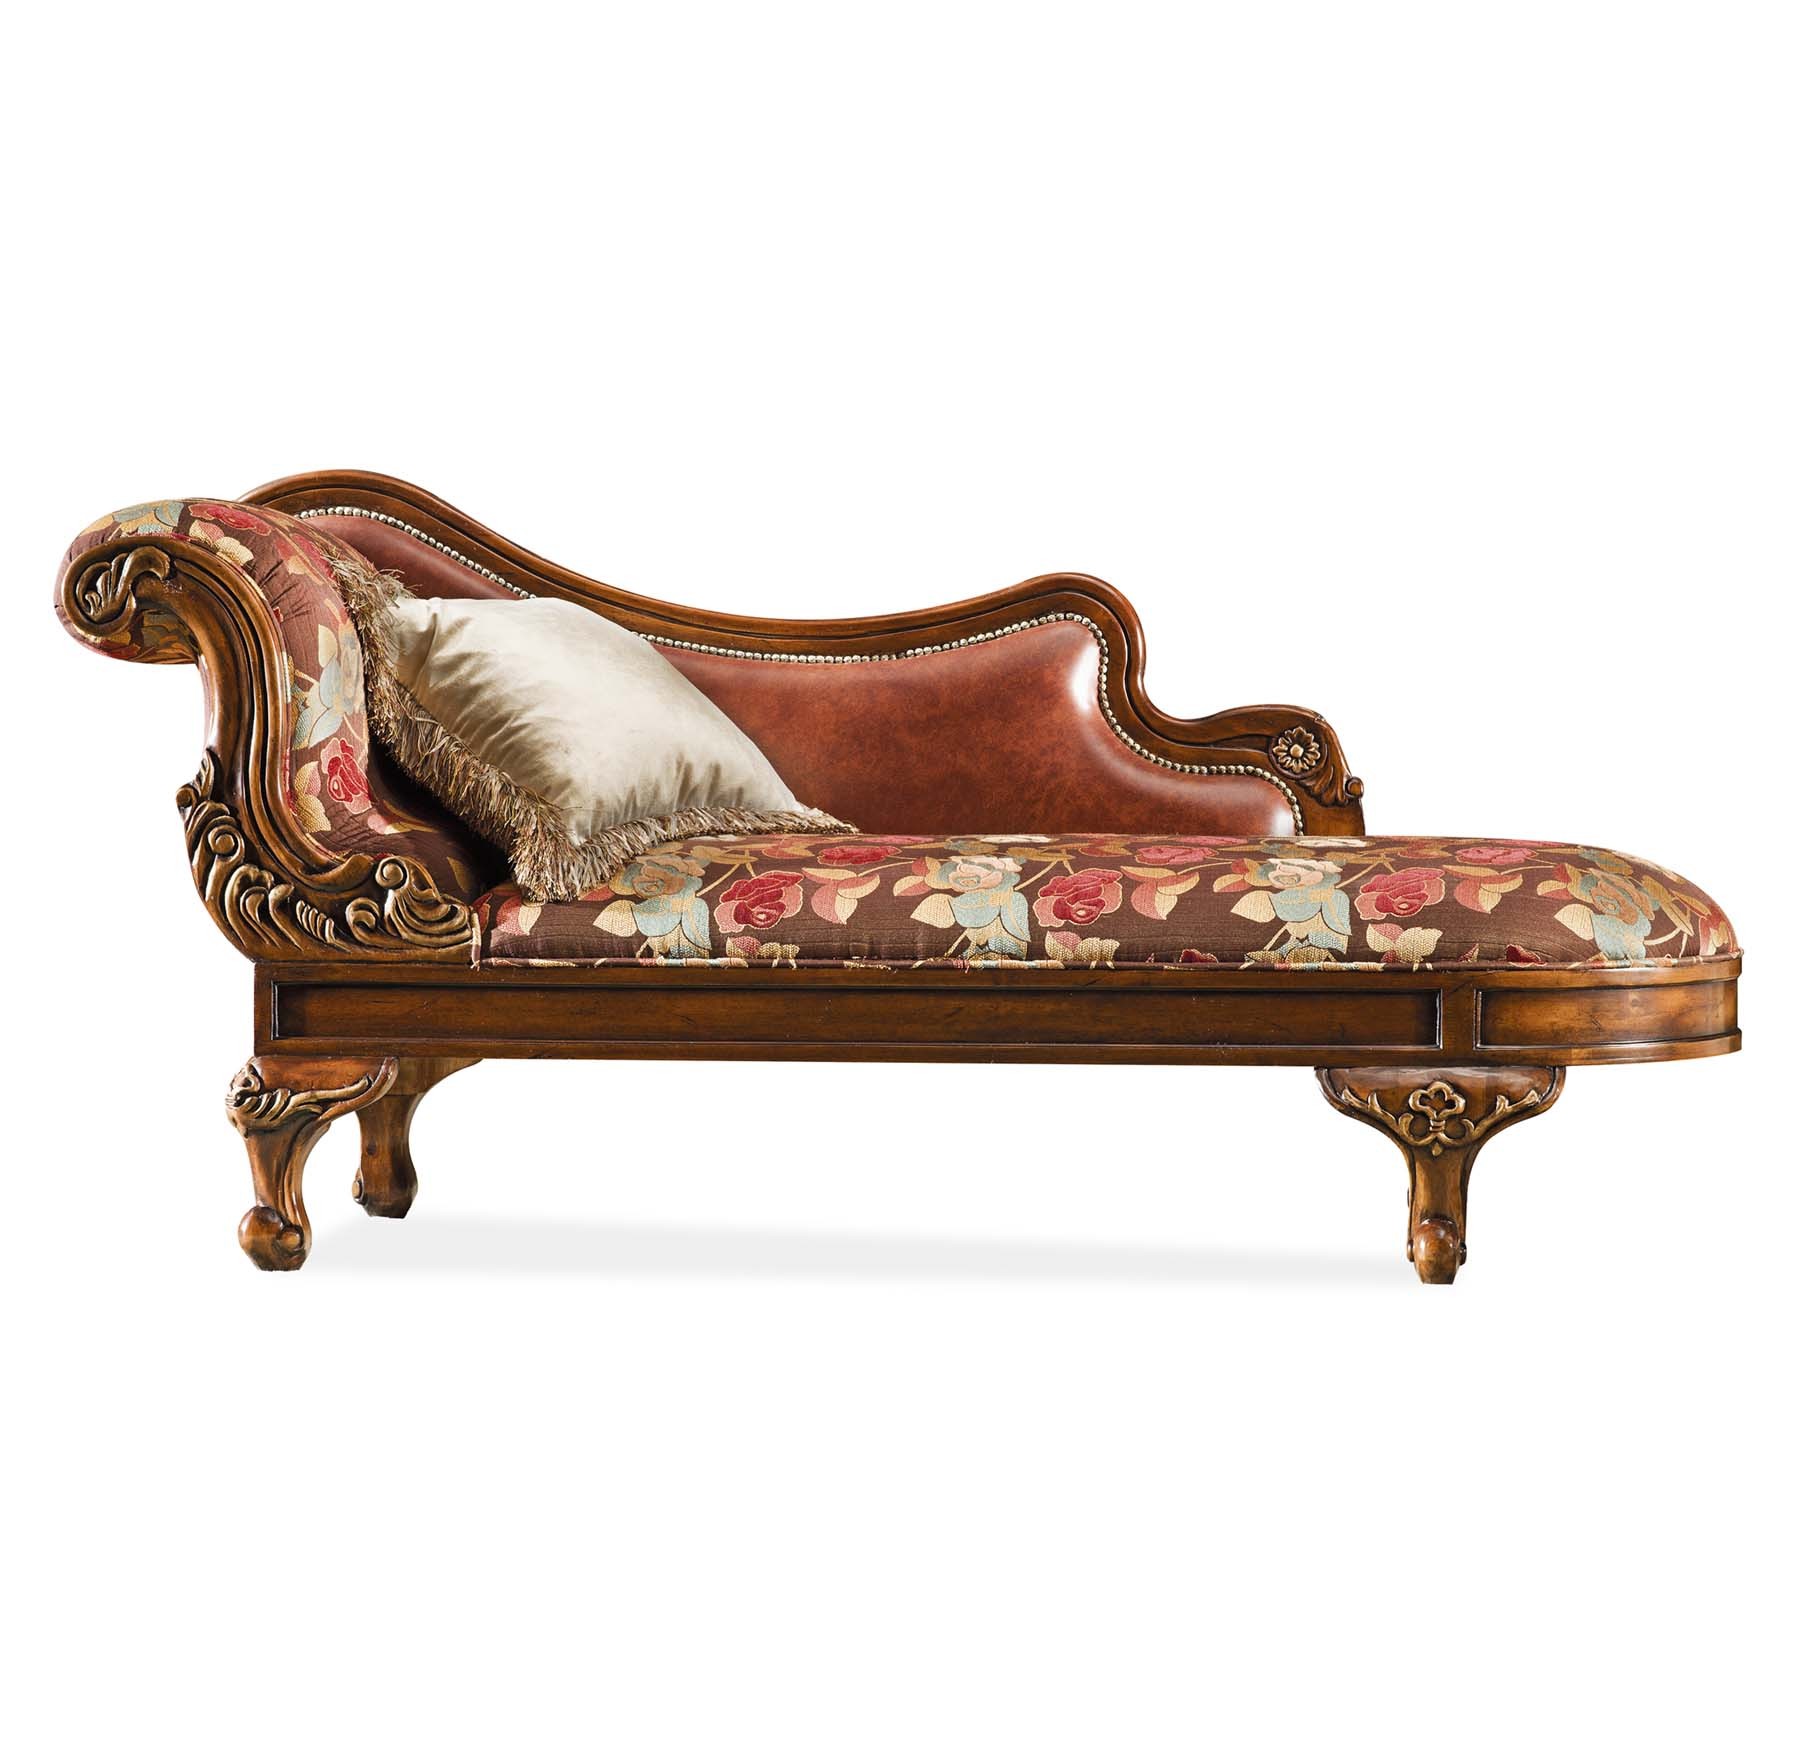 Belmont Chaise Lounge Sofa shown in Antique Walnut finish